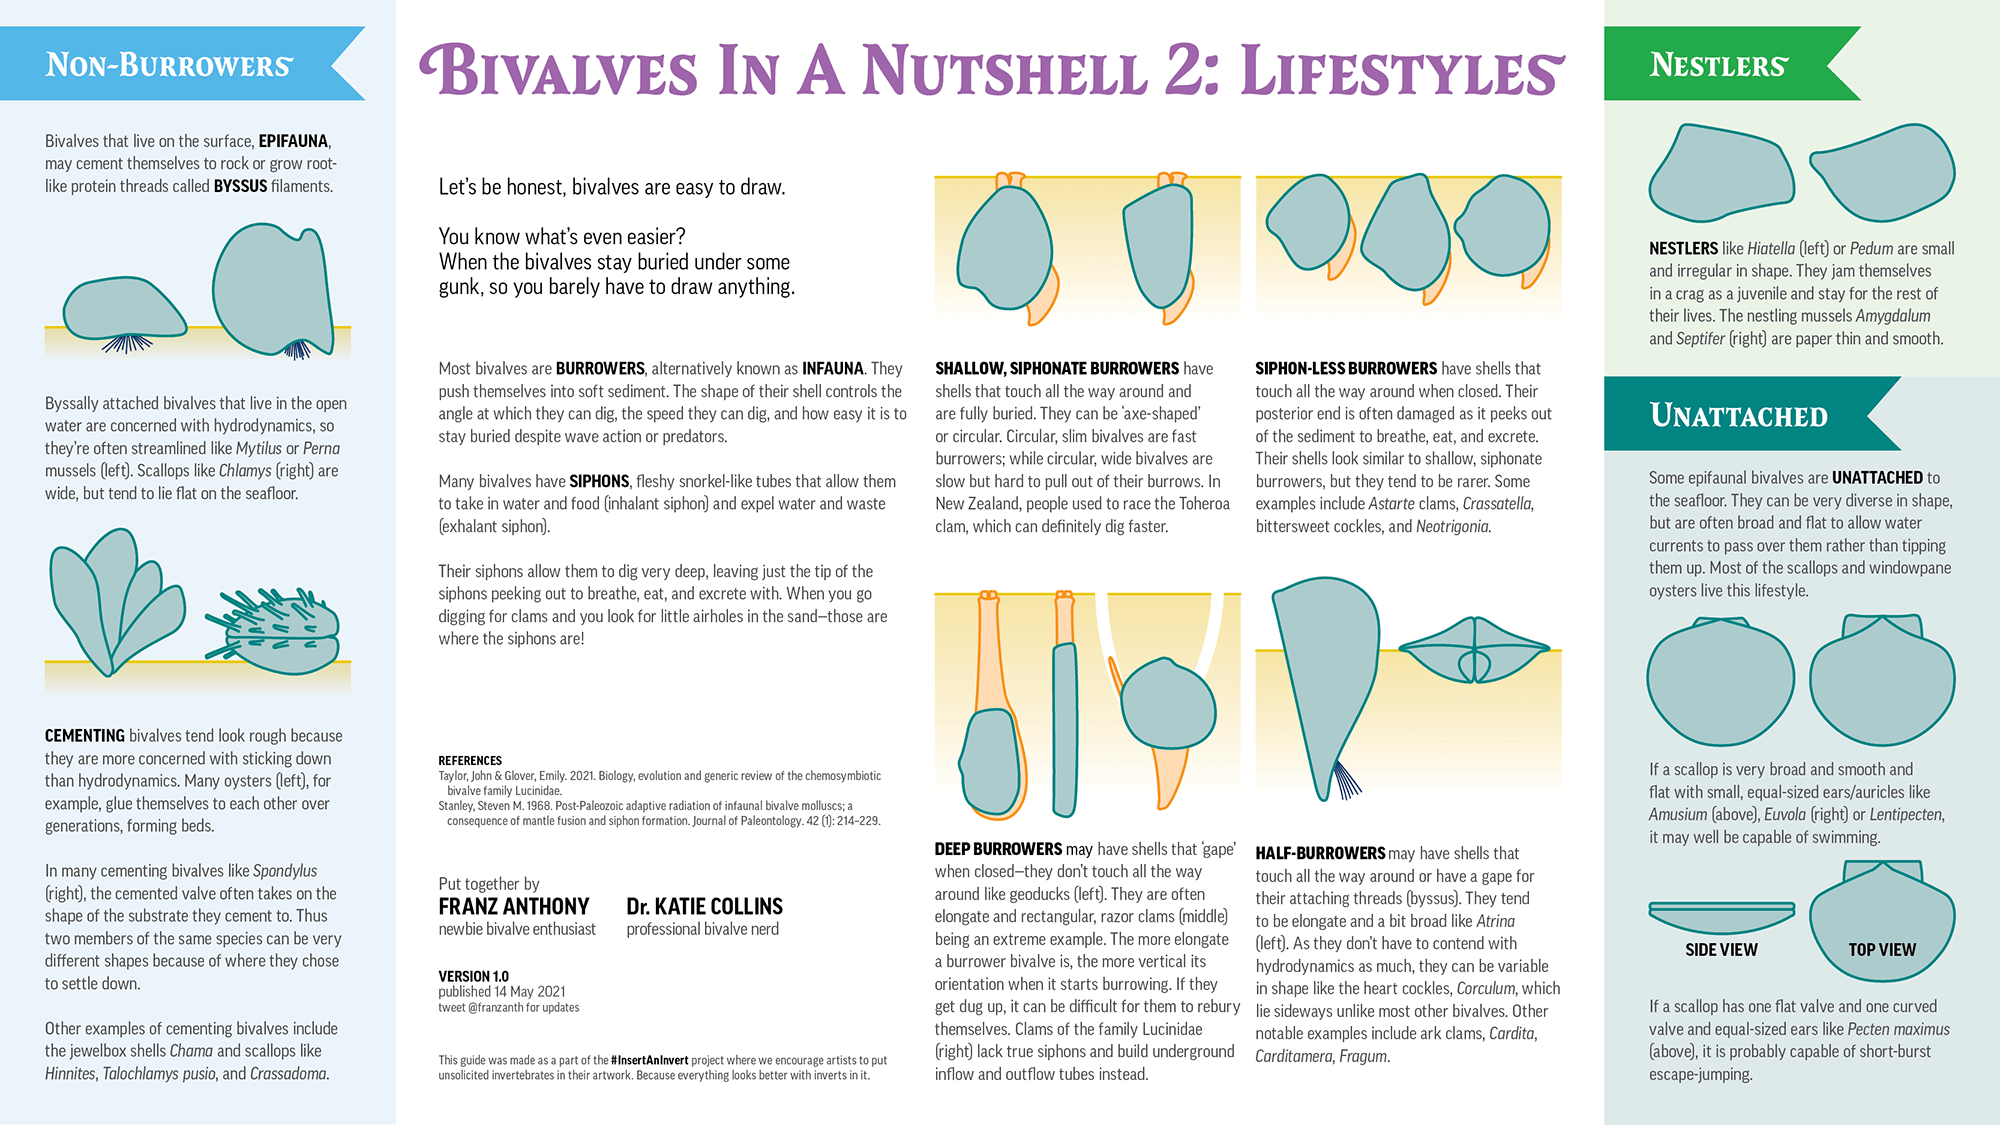 Infographic showing the various lifestyles of bivalves.